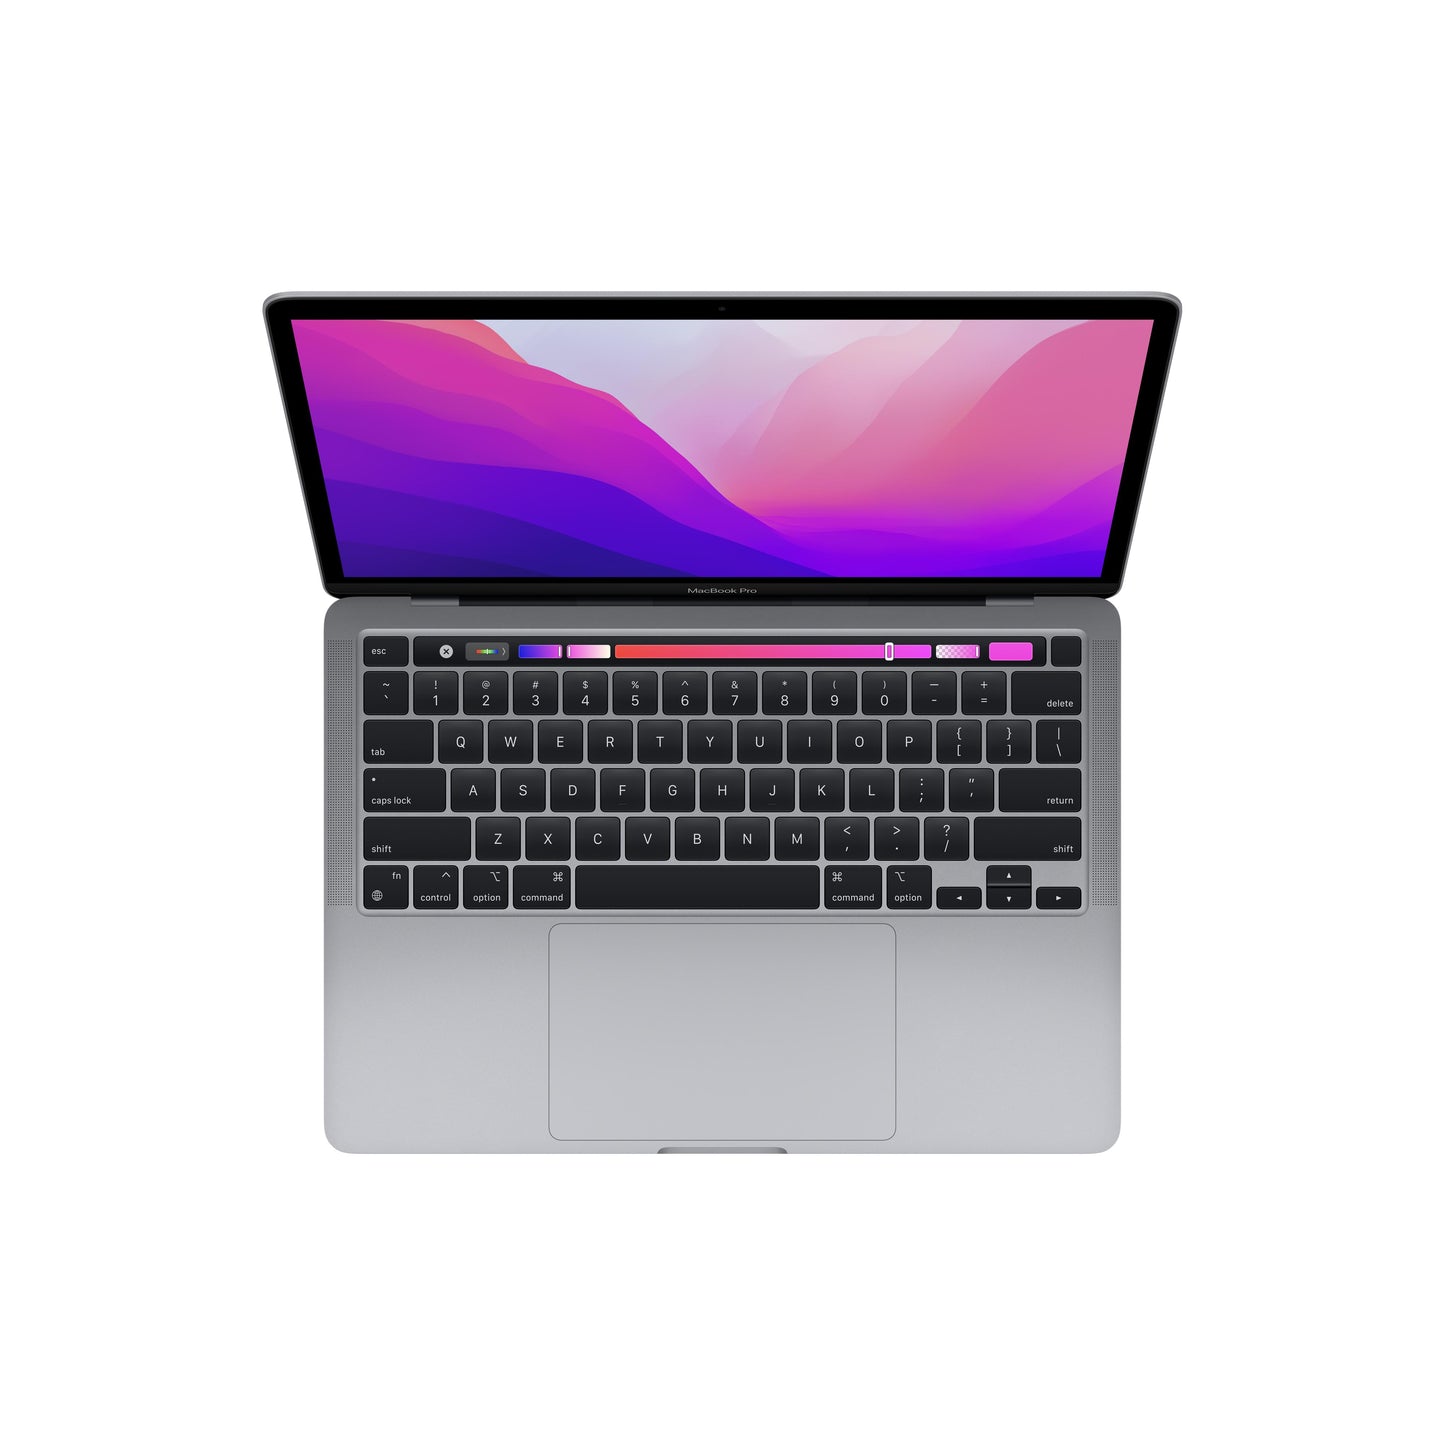 13-inch MacBook Pro: Apple M2 chip with 8_core CPU and 10_core GPU, 512GB SSD - Space Grey